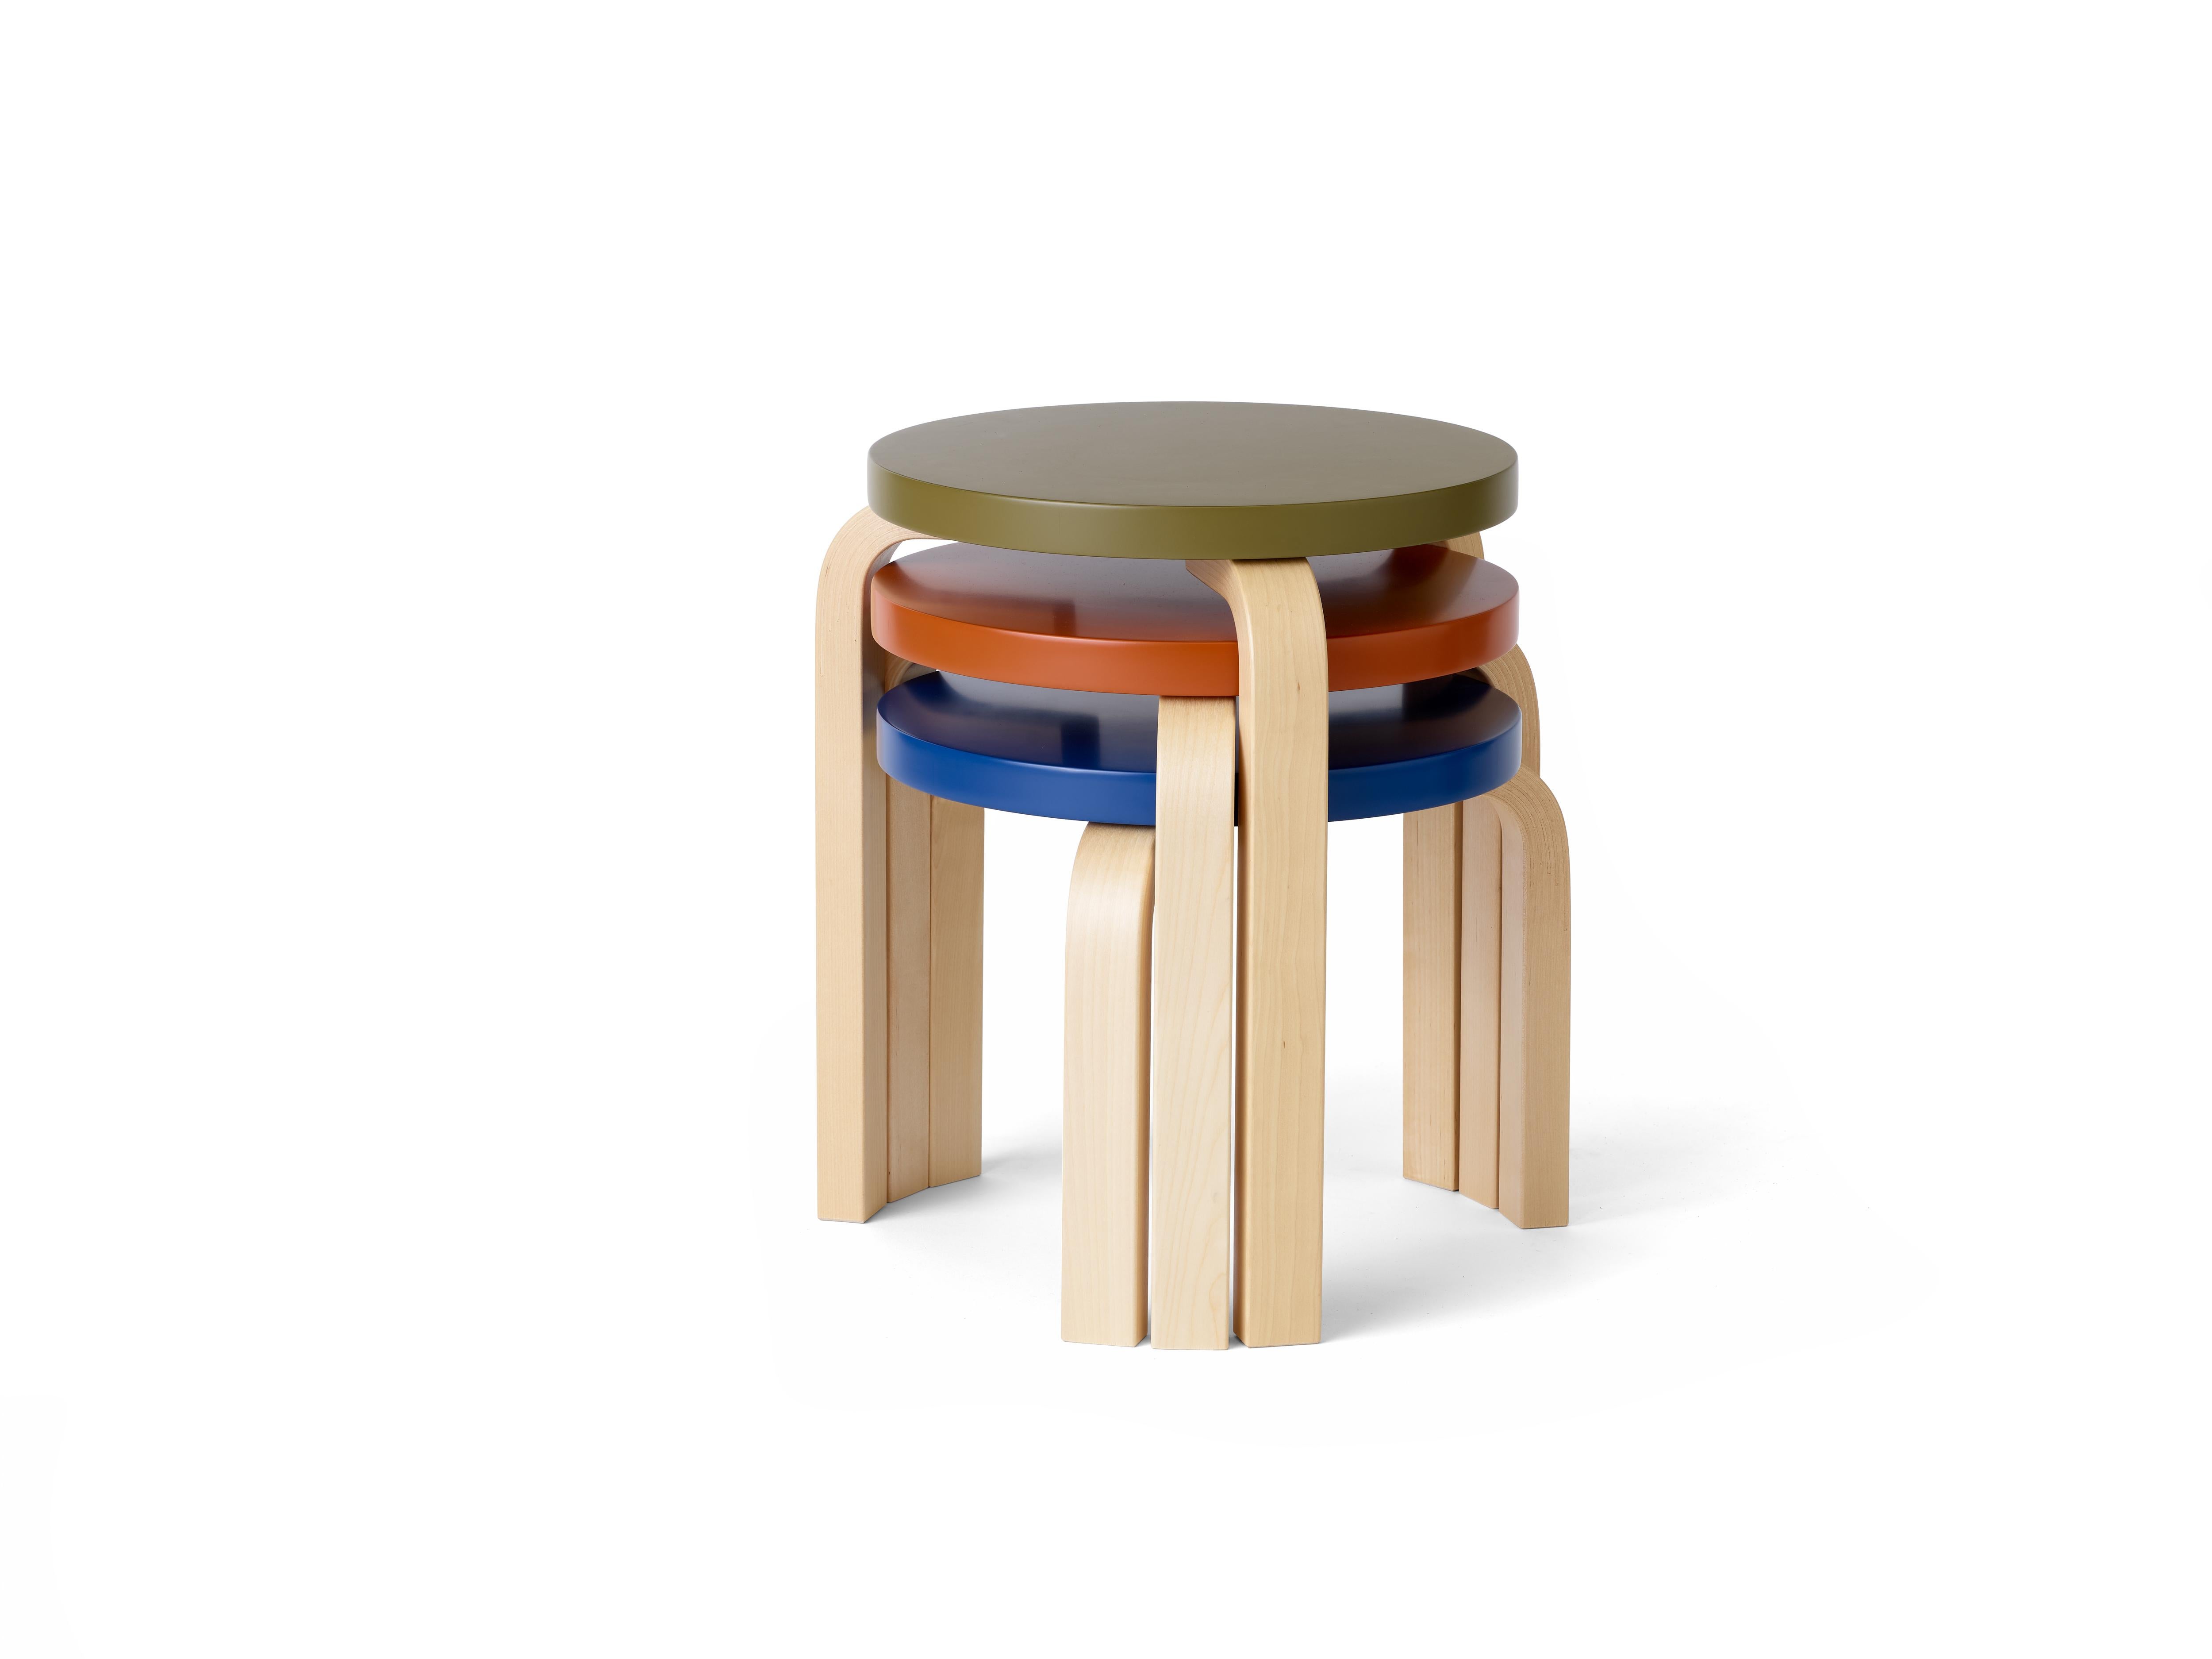 Limited Edition Low Stool 60 in Moonstone by Artek and Heath (Finnisch)